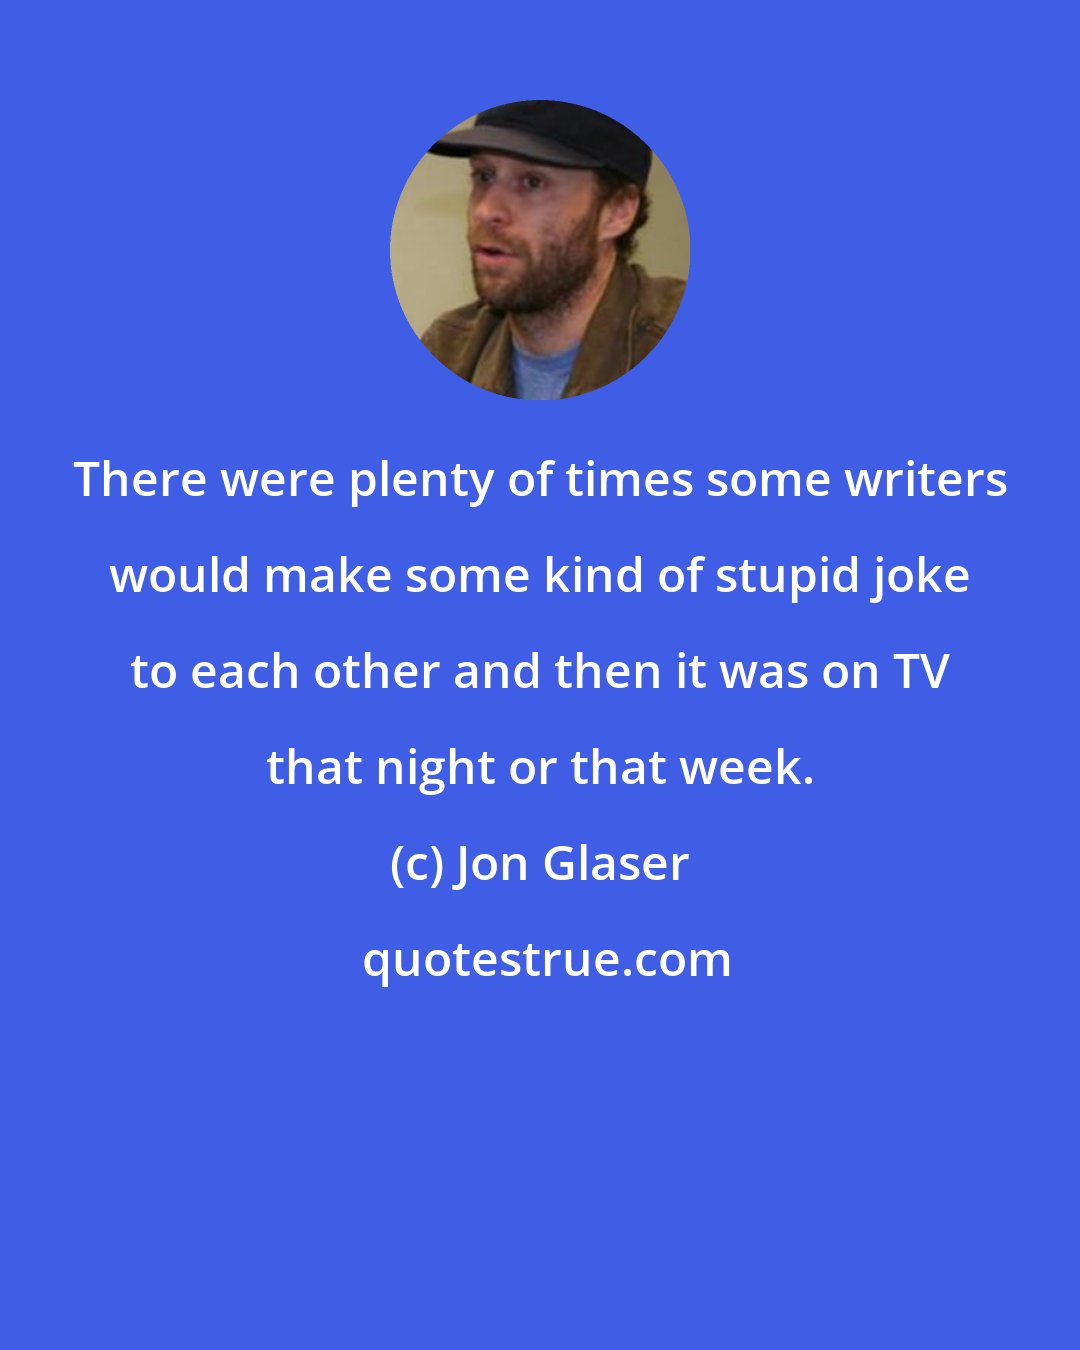 Jon Glaser: There were plenty of times some writers would make some kind of stupid joke to each other and then it was on TV that night or that week.